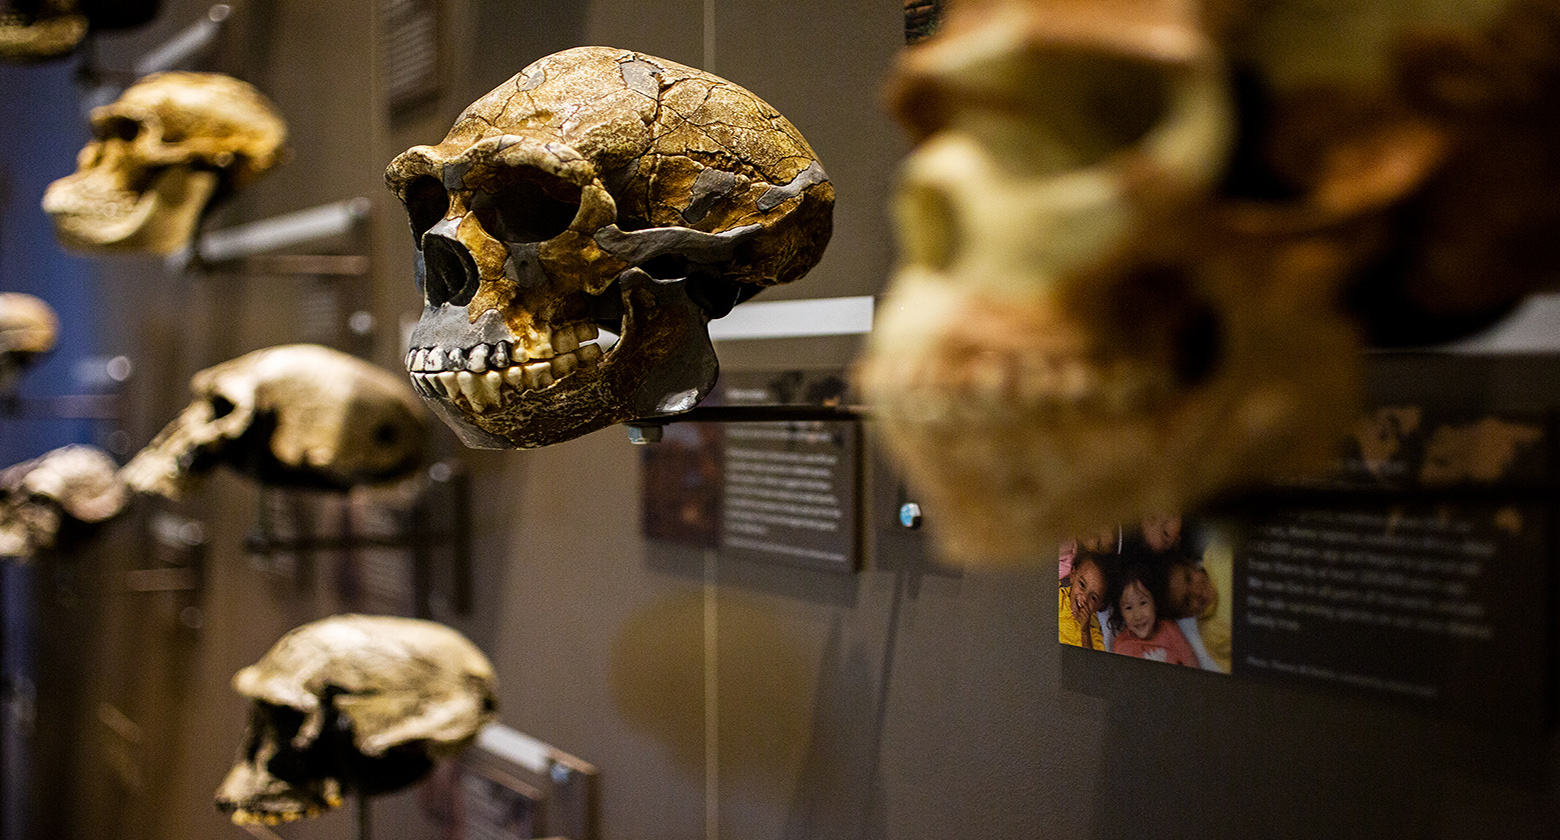 [image] Learn About Human Evolution at NHMU